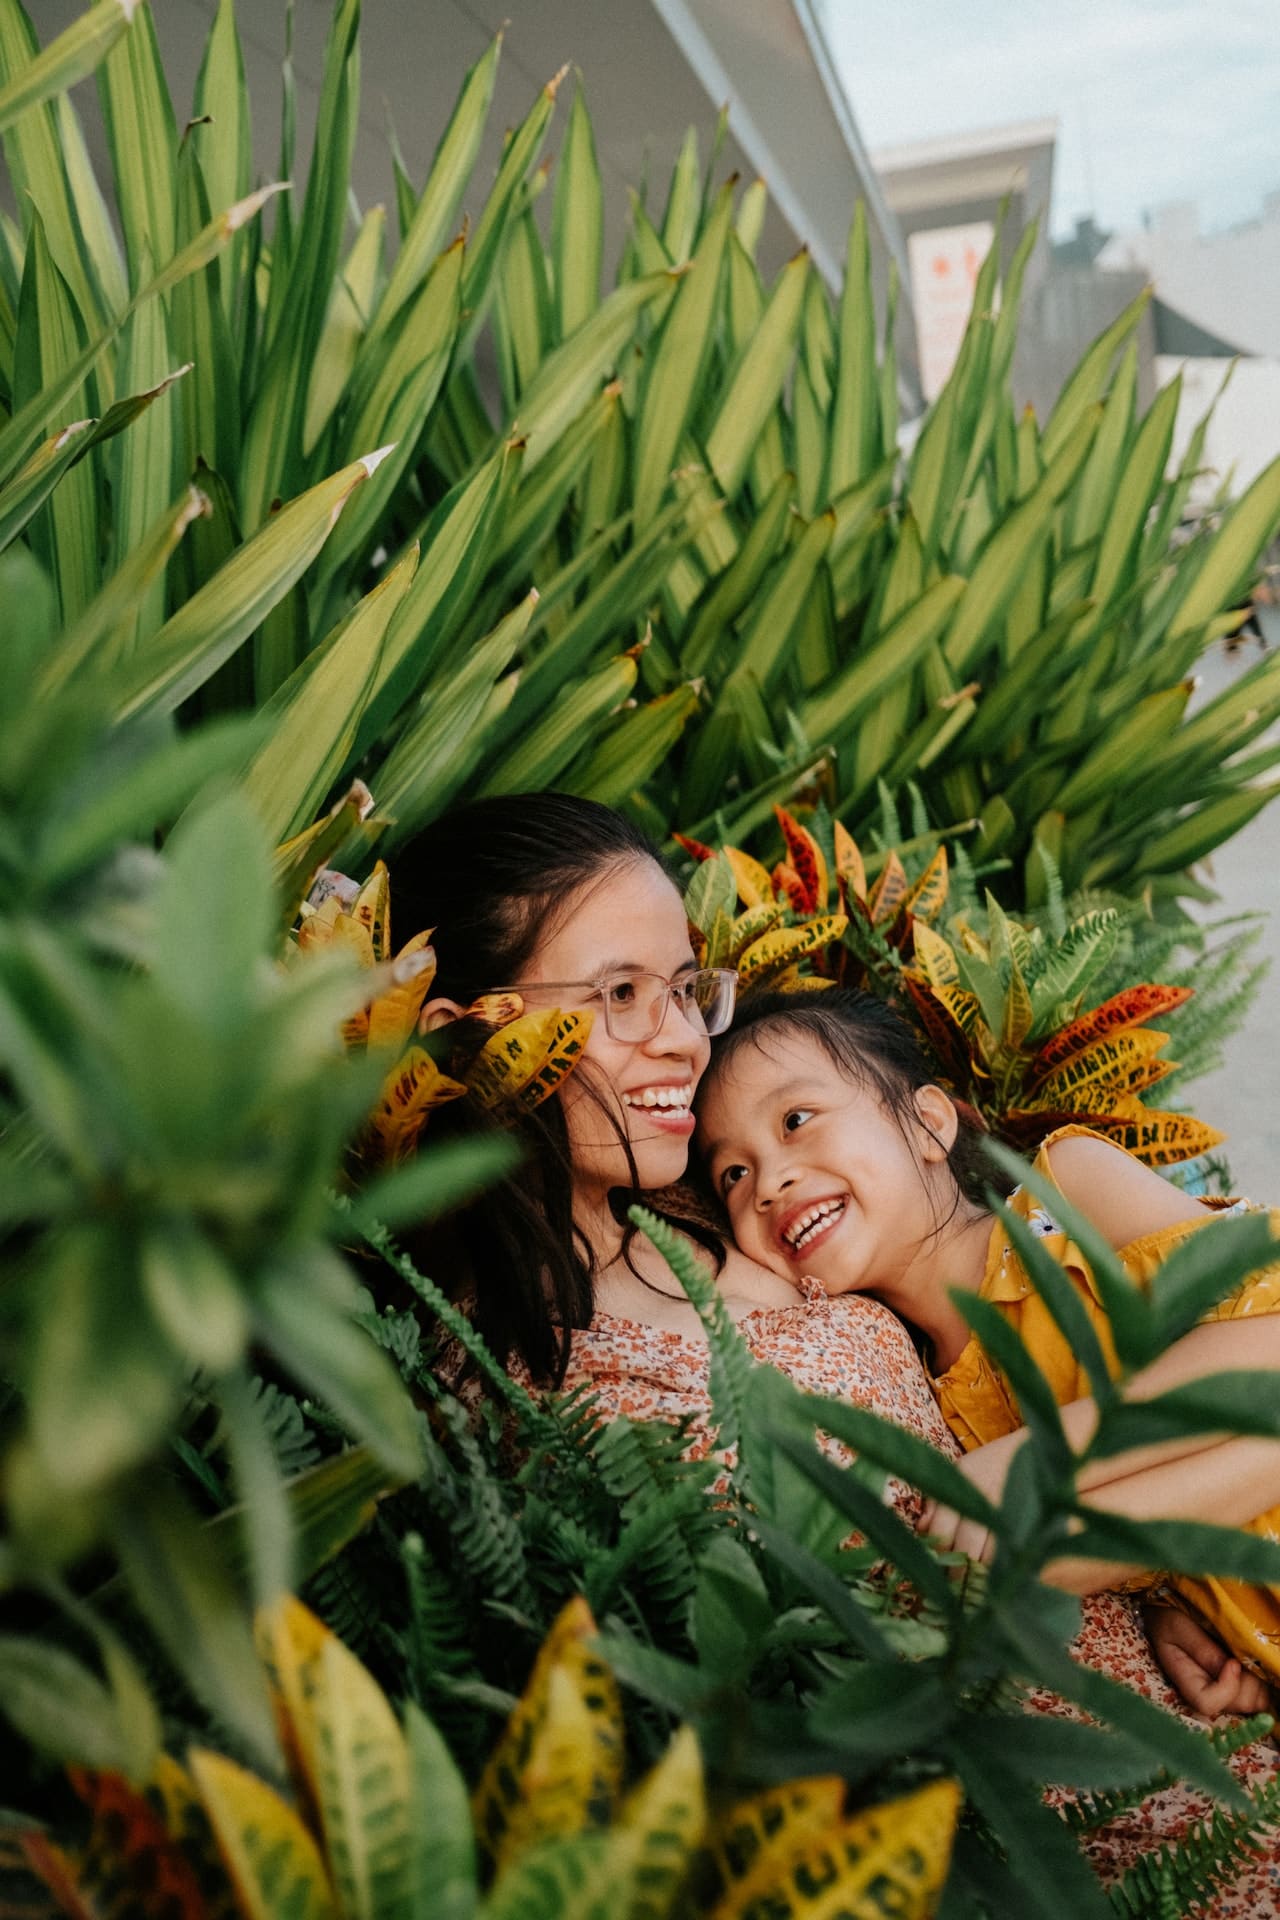 Mother and daughter looking playful and happy against a background of tropical plants.